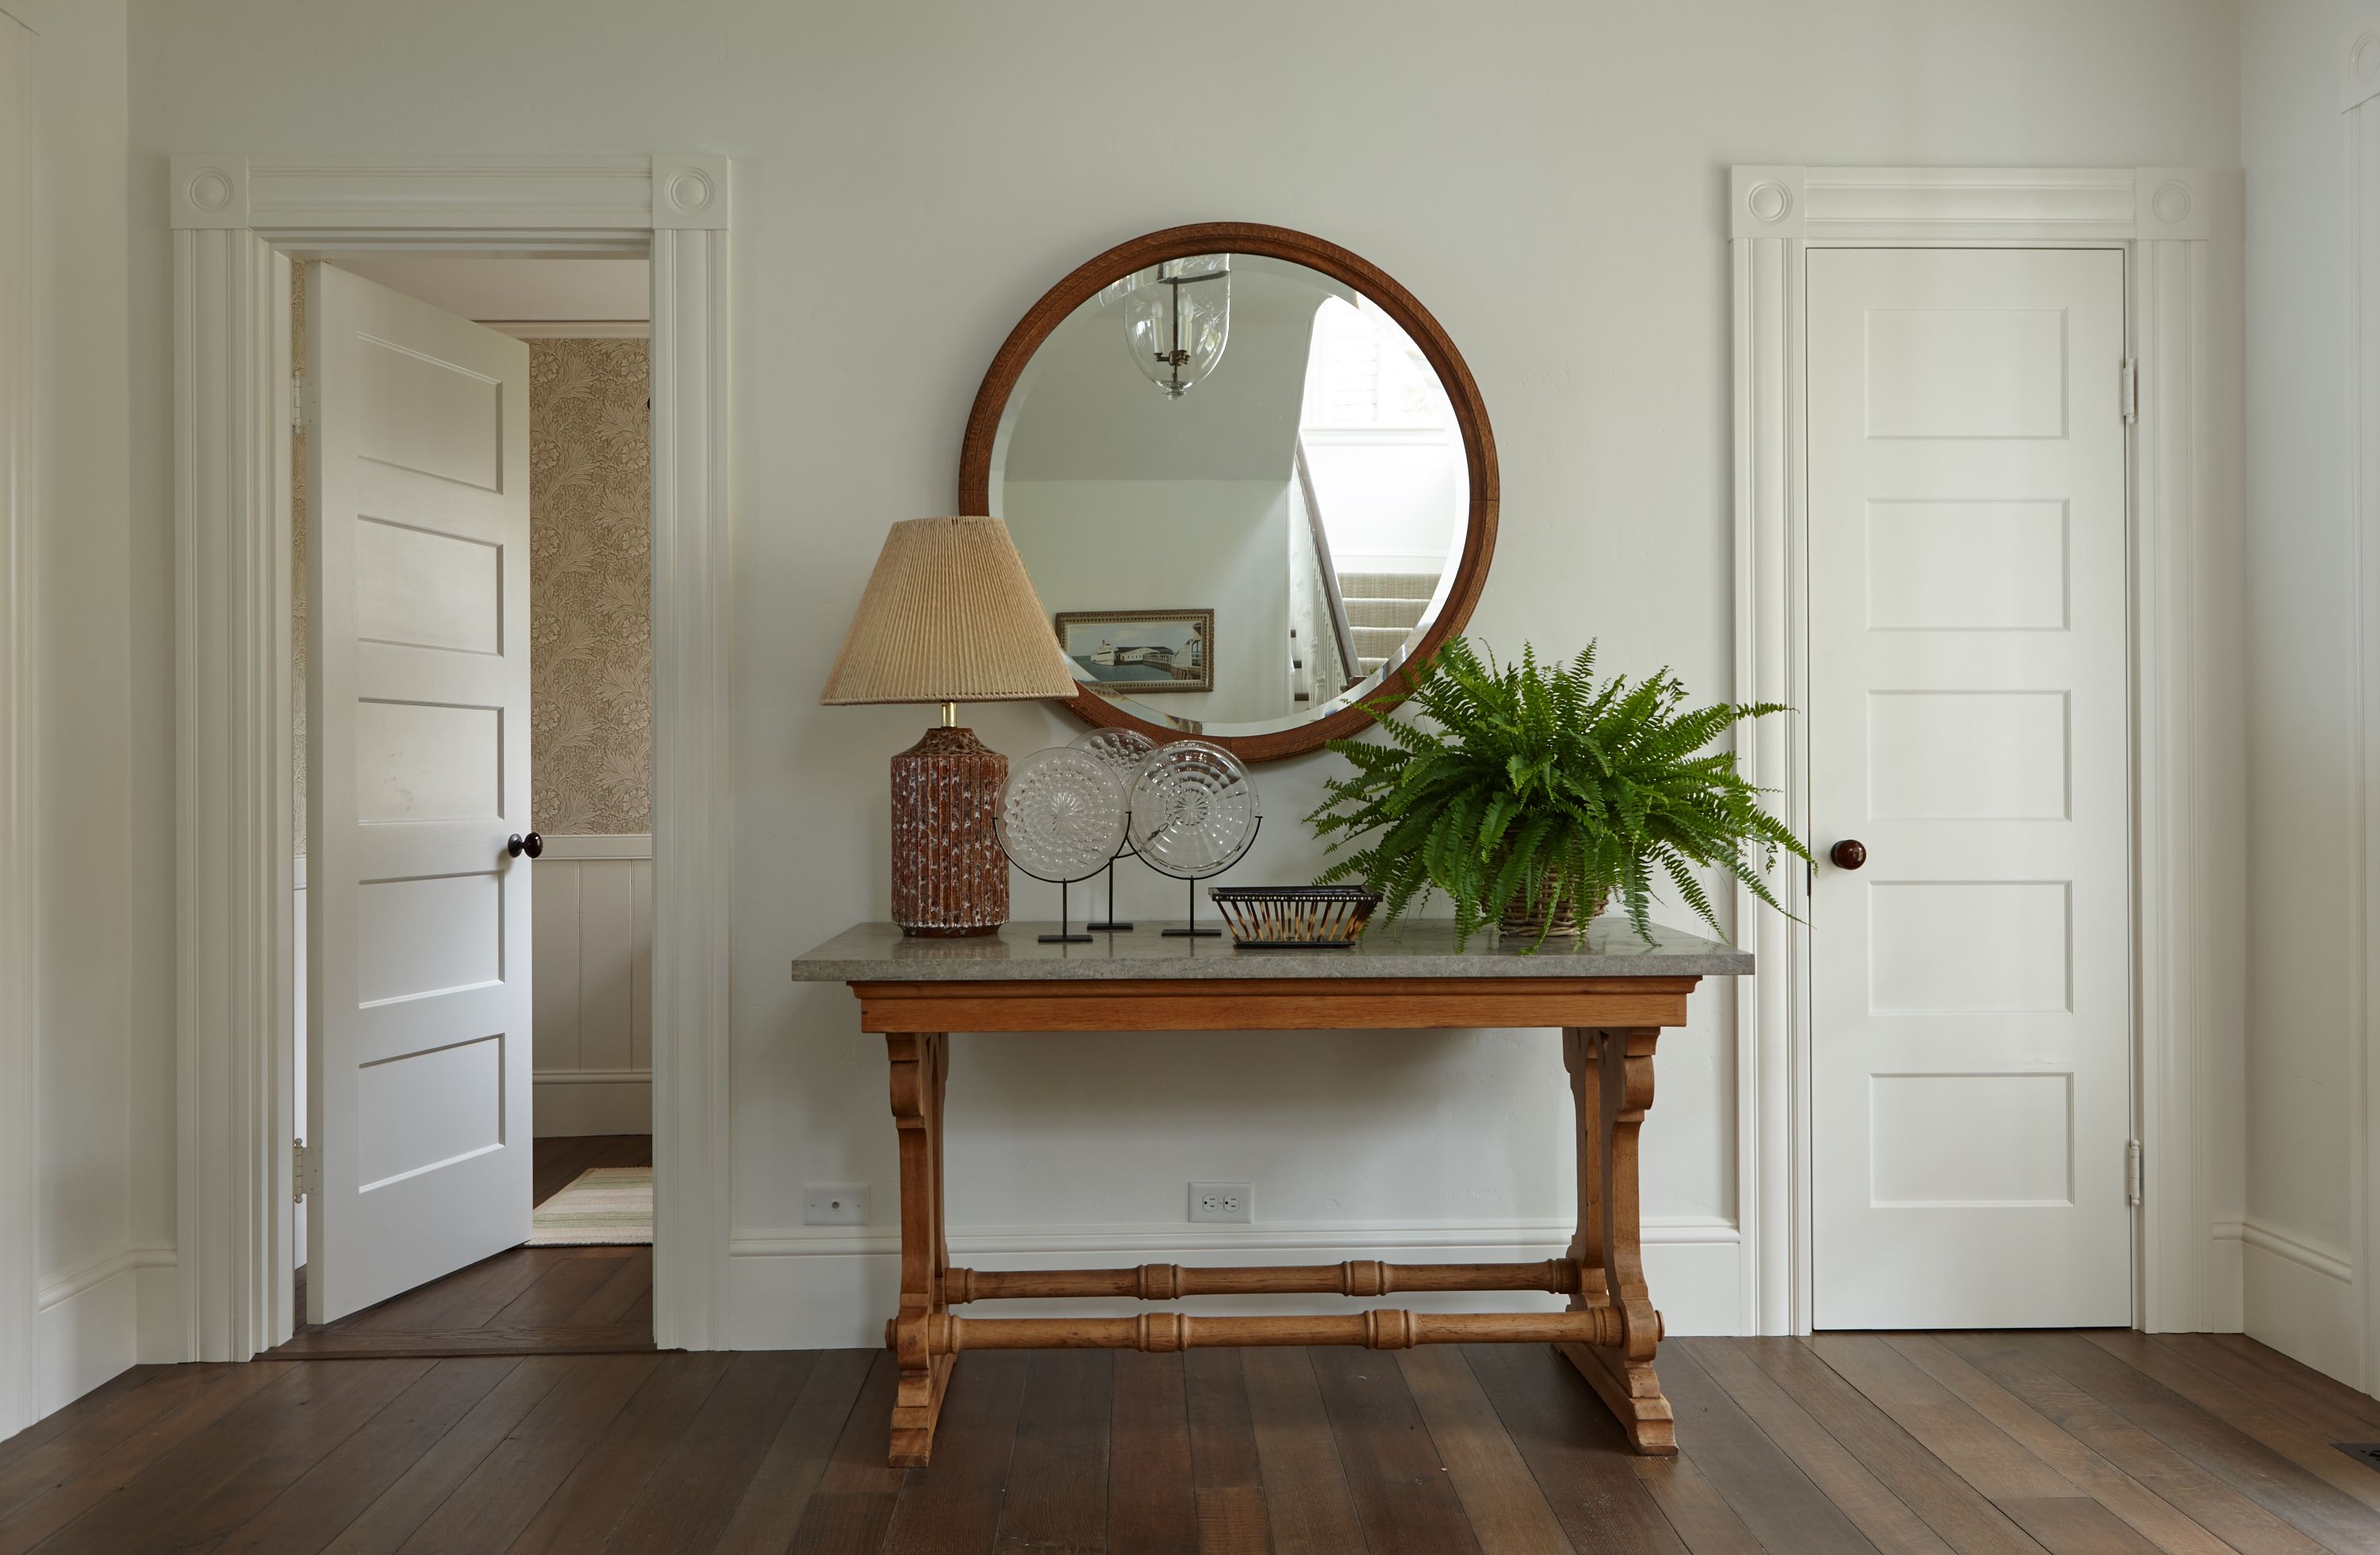 how to decorate a console table